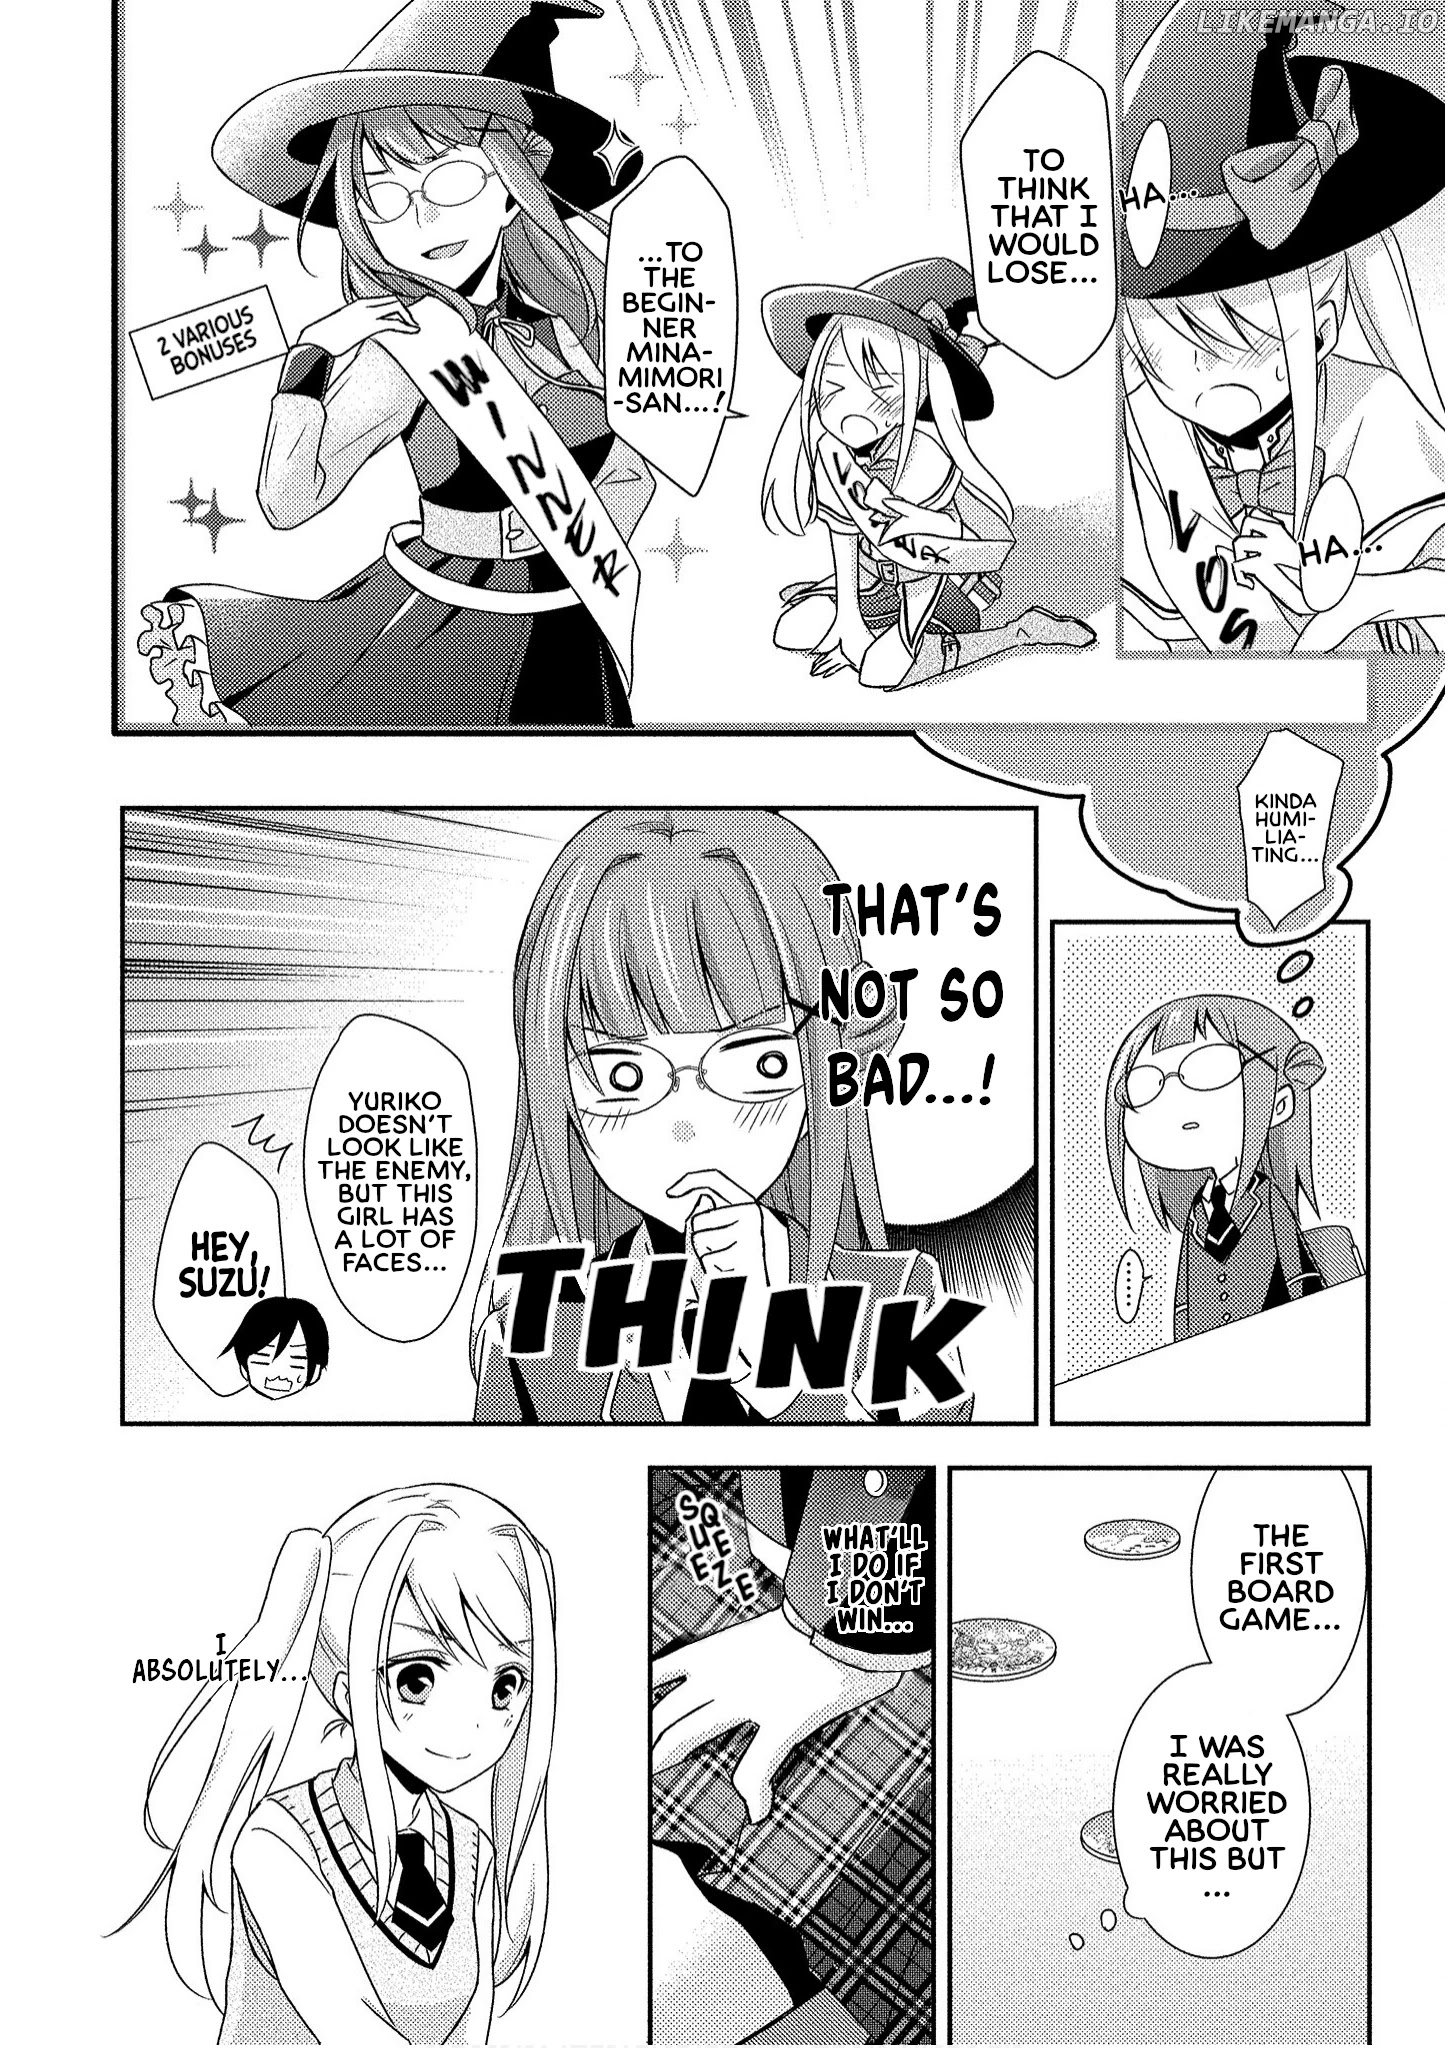 Tennouji-San Wants To Play Boardgames chapter 4 - page 2